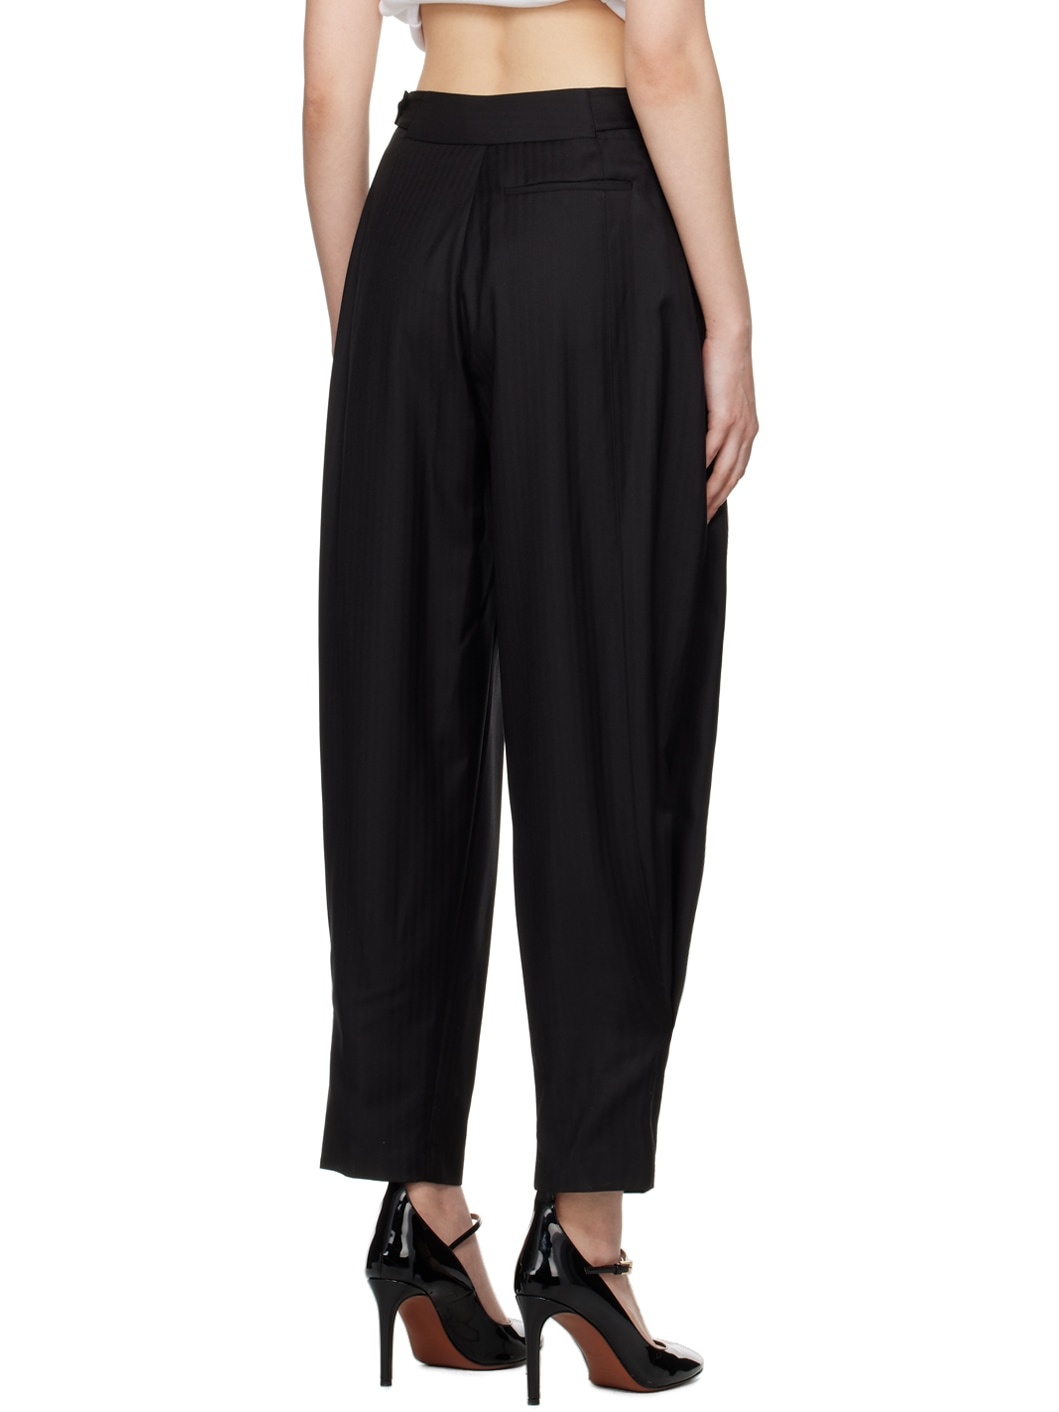 Black Loose Trousers - 4